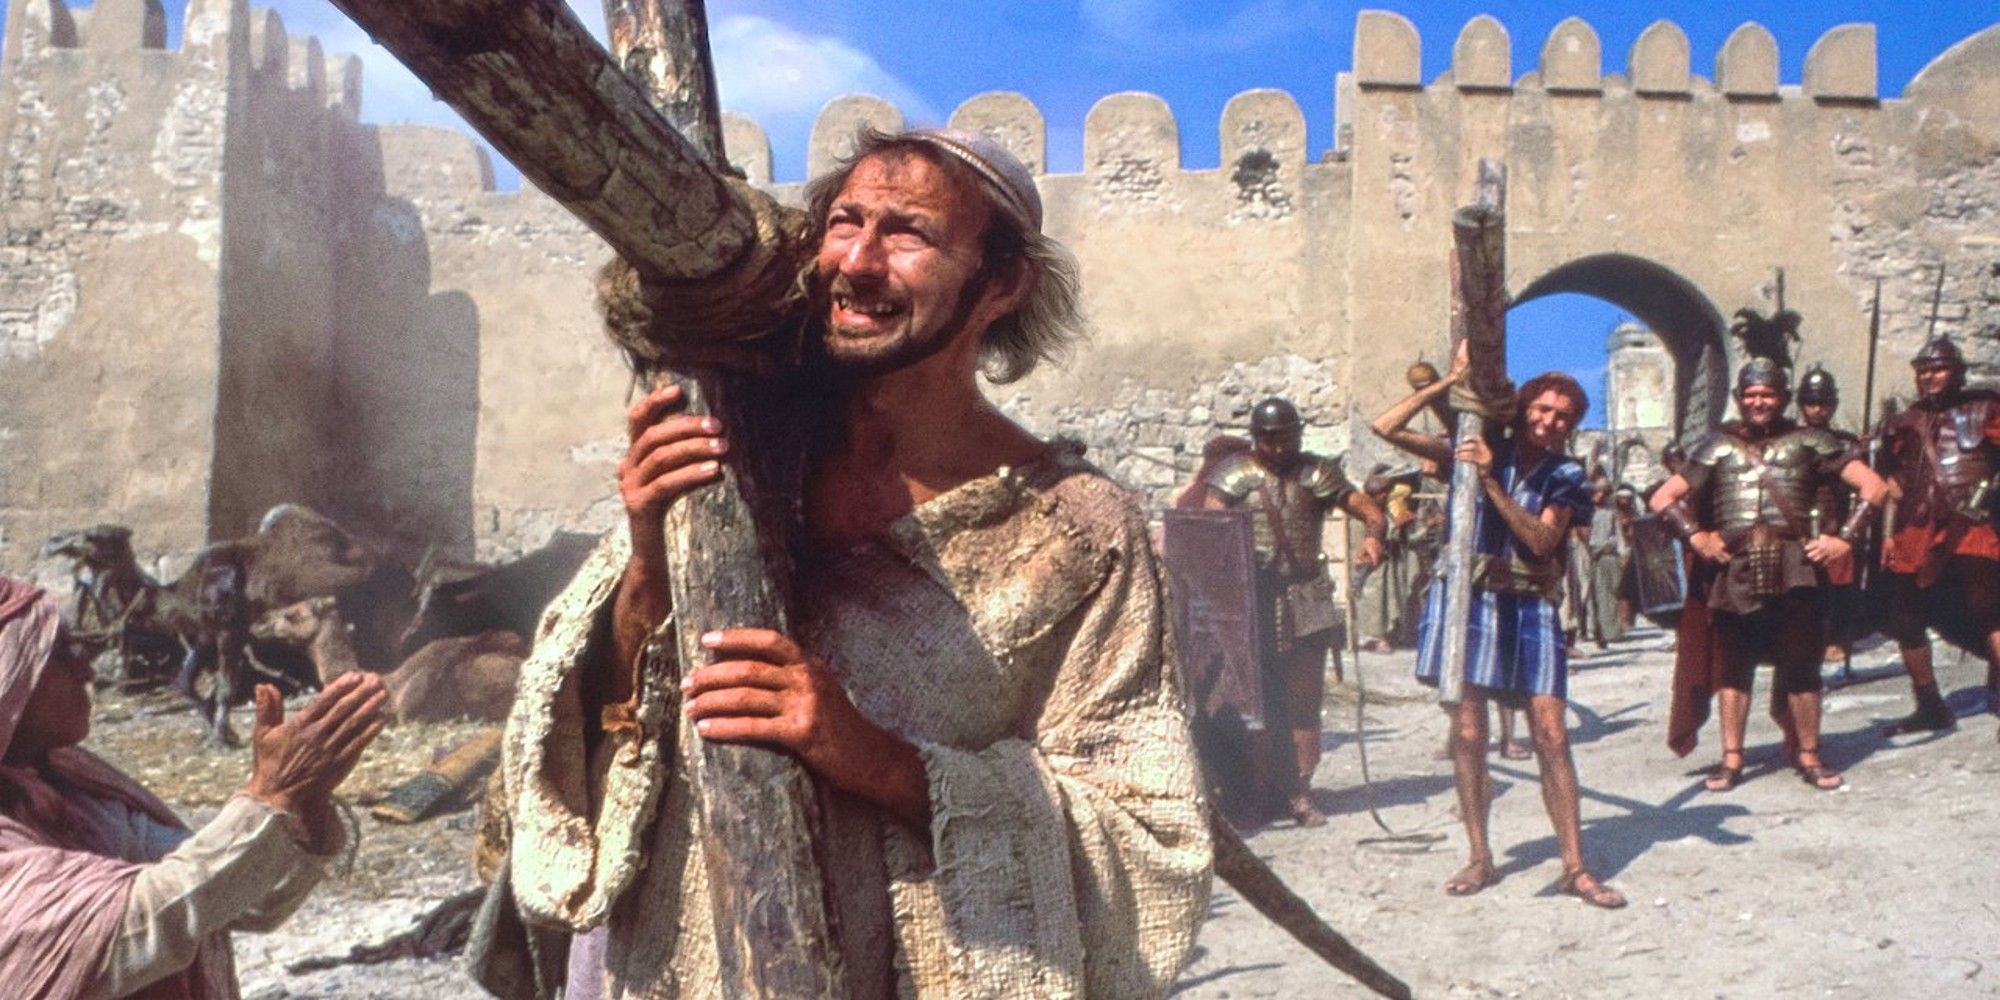 Brian carries his cross in Life of Brian